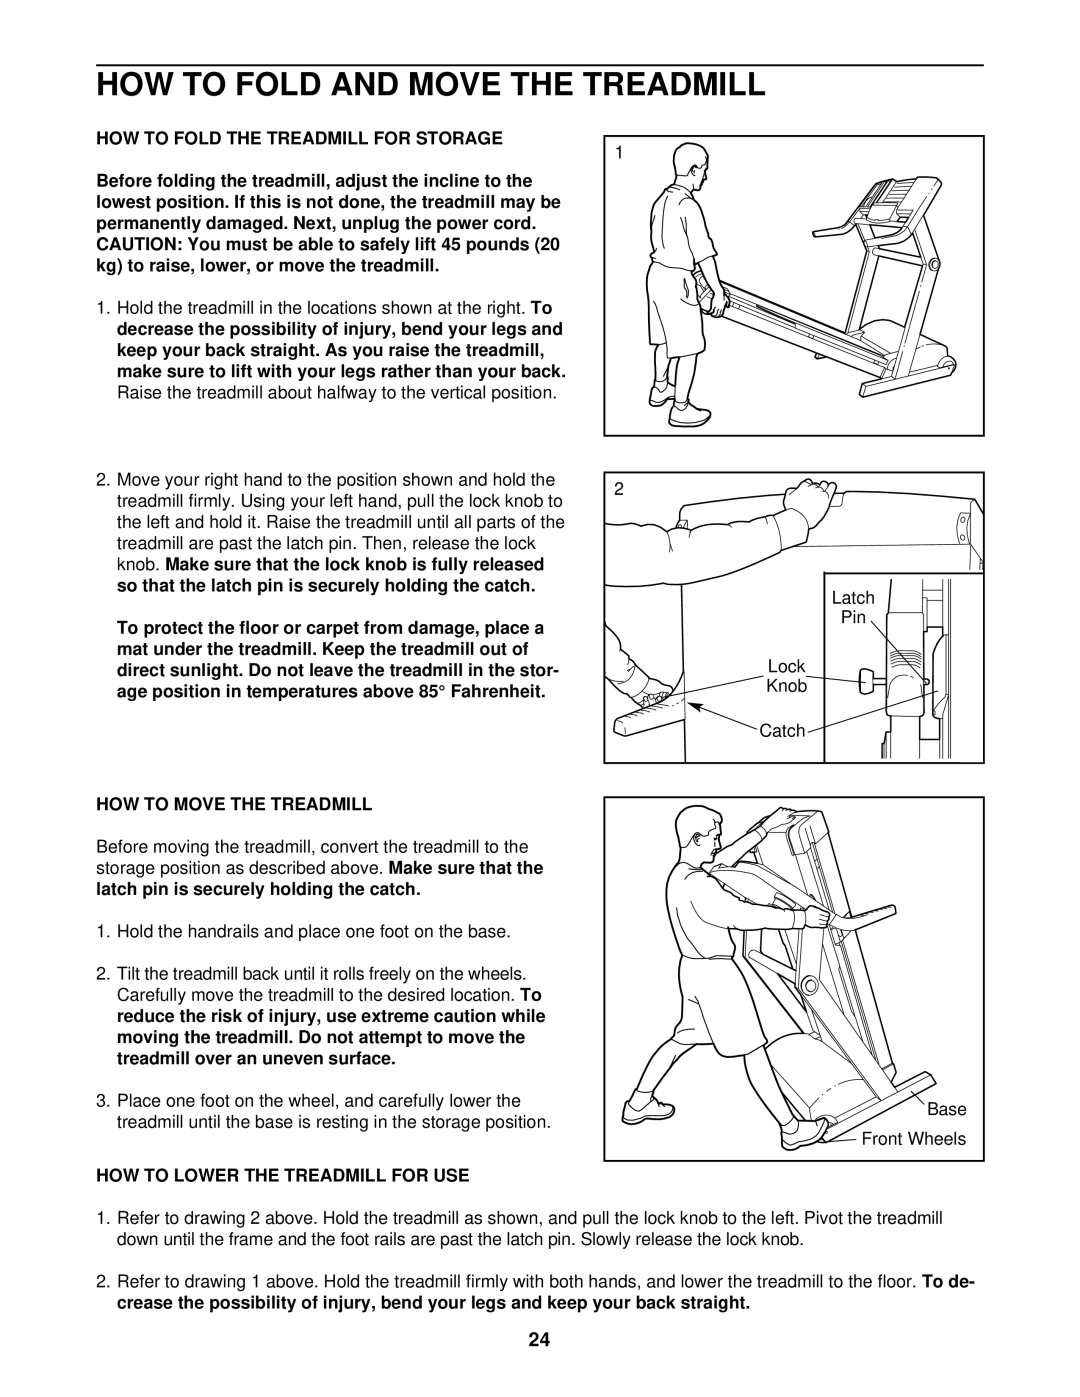 ProForm PFTL14920 HOW to Fold and Move the Treadmill, HOW to Fold the Treadmill for Storage, HOW to Move the Treadmill 